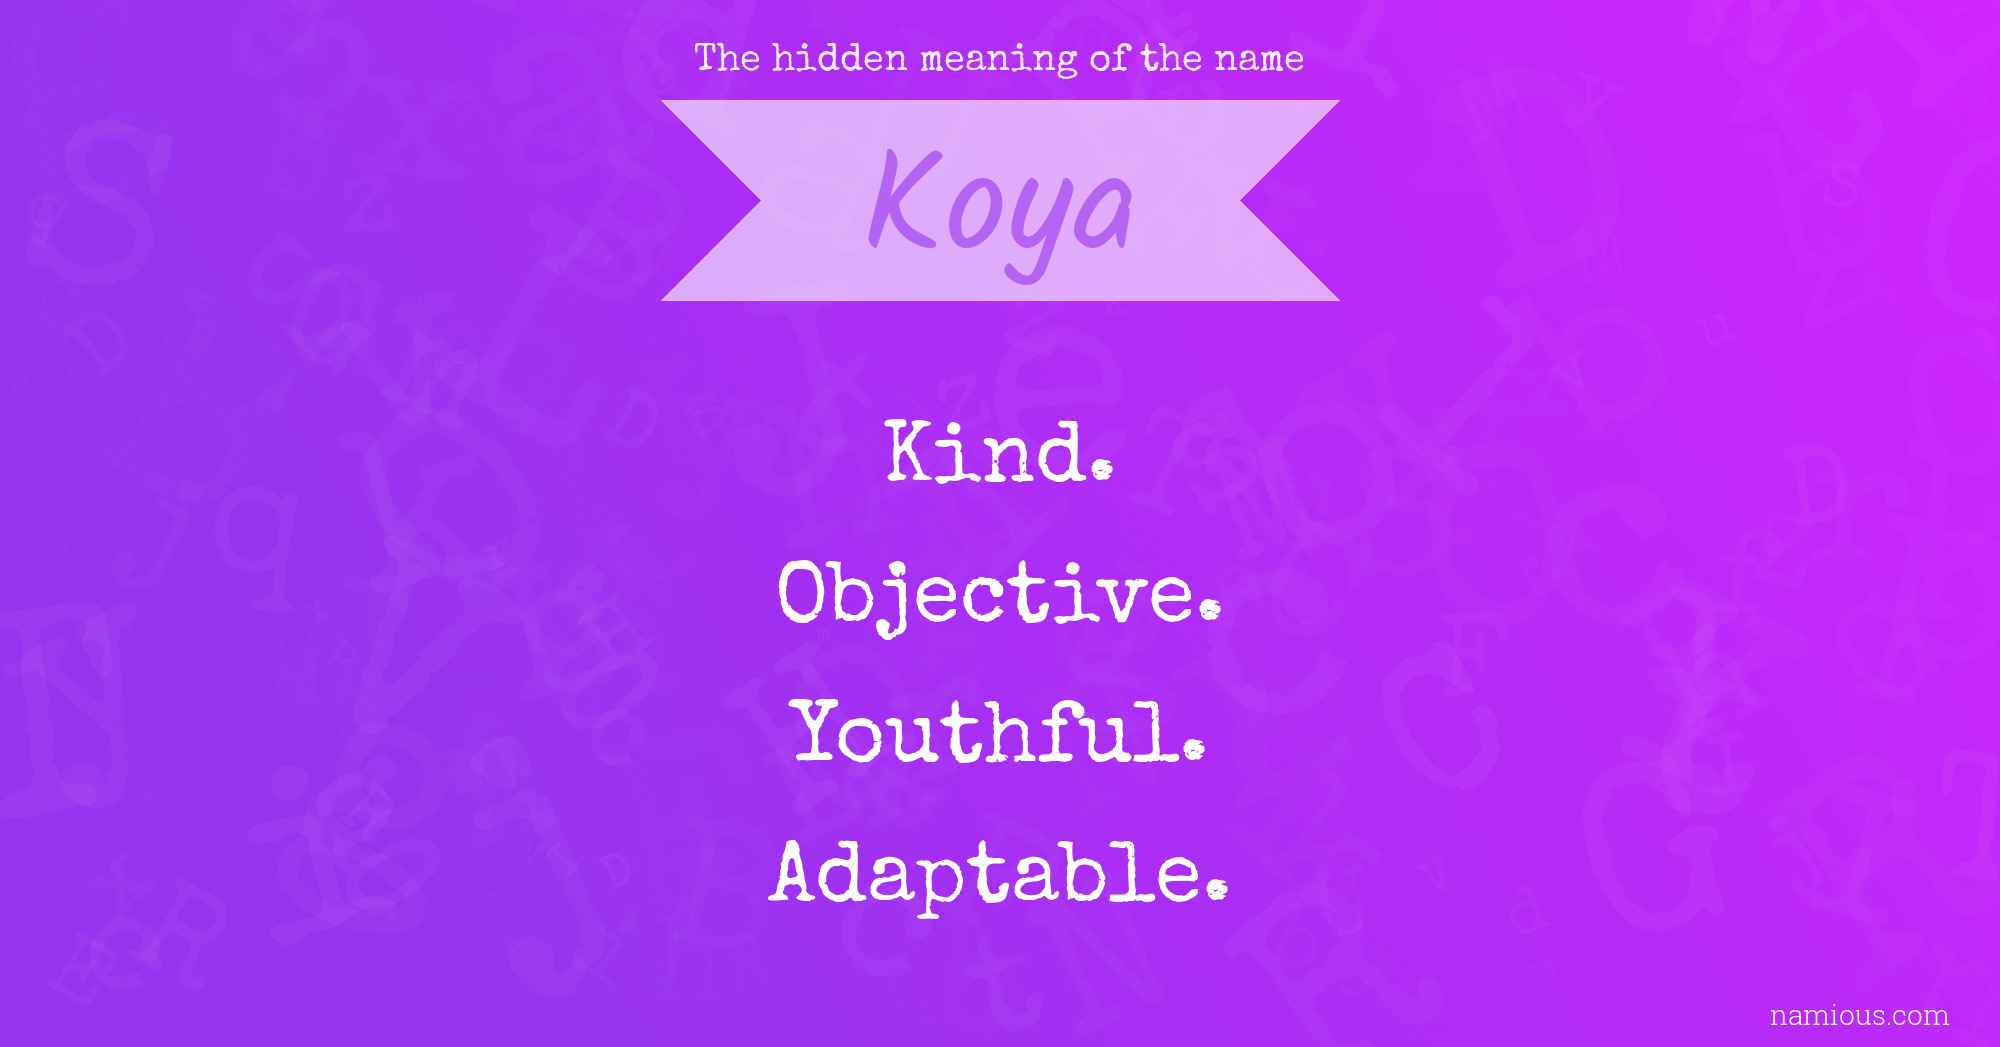 The hidden meaning of the name Koya